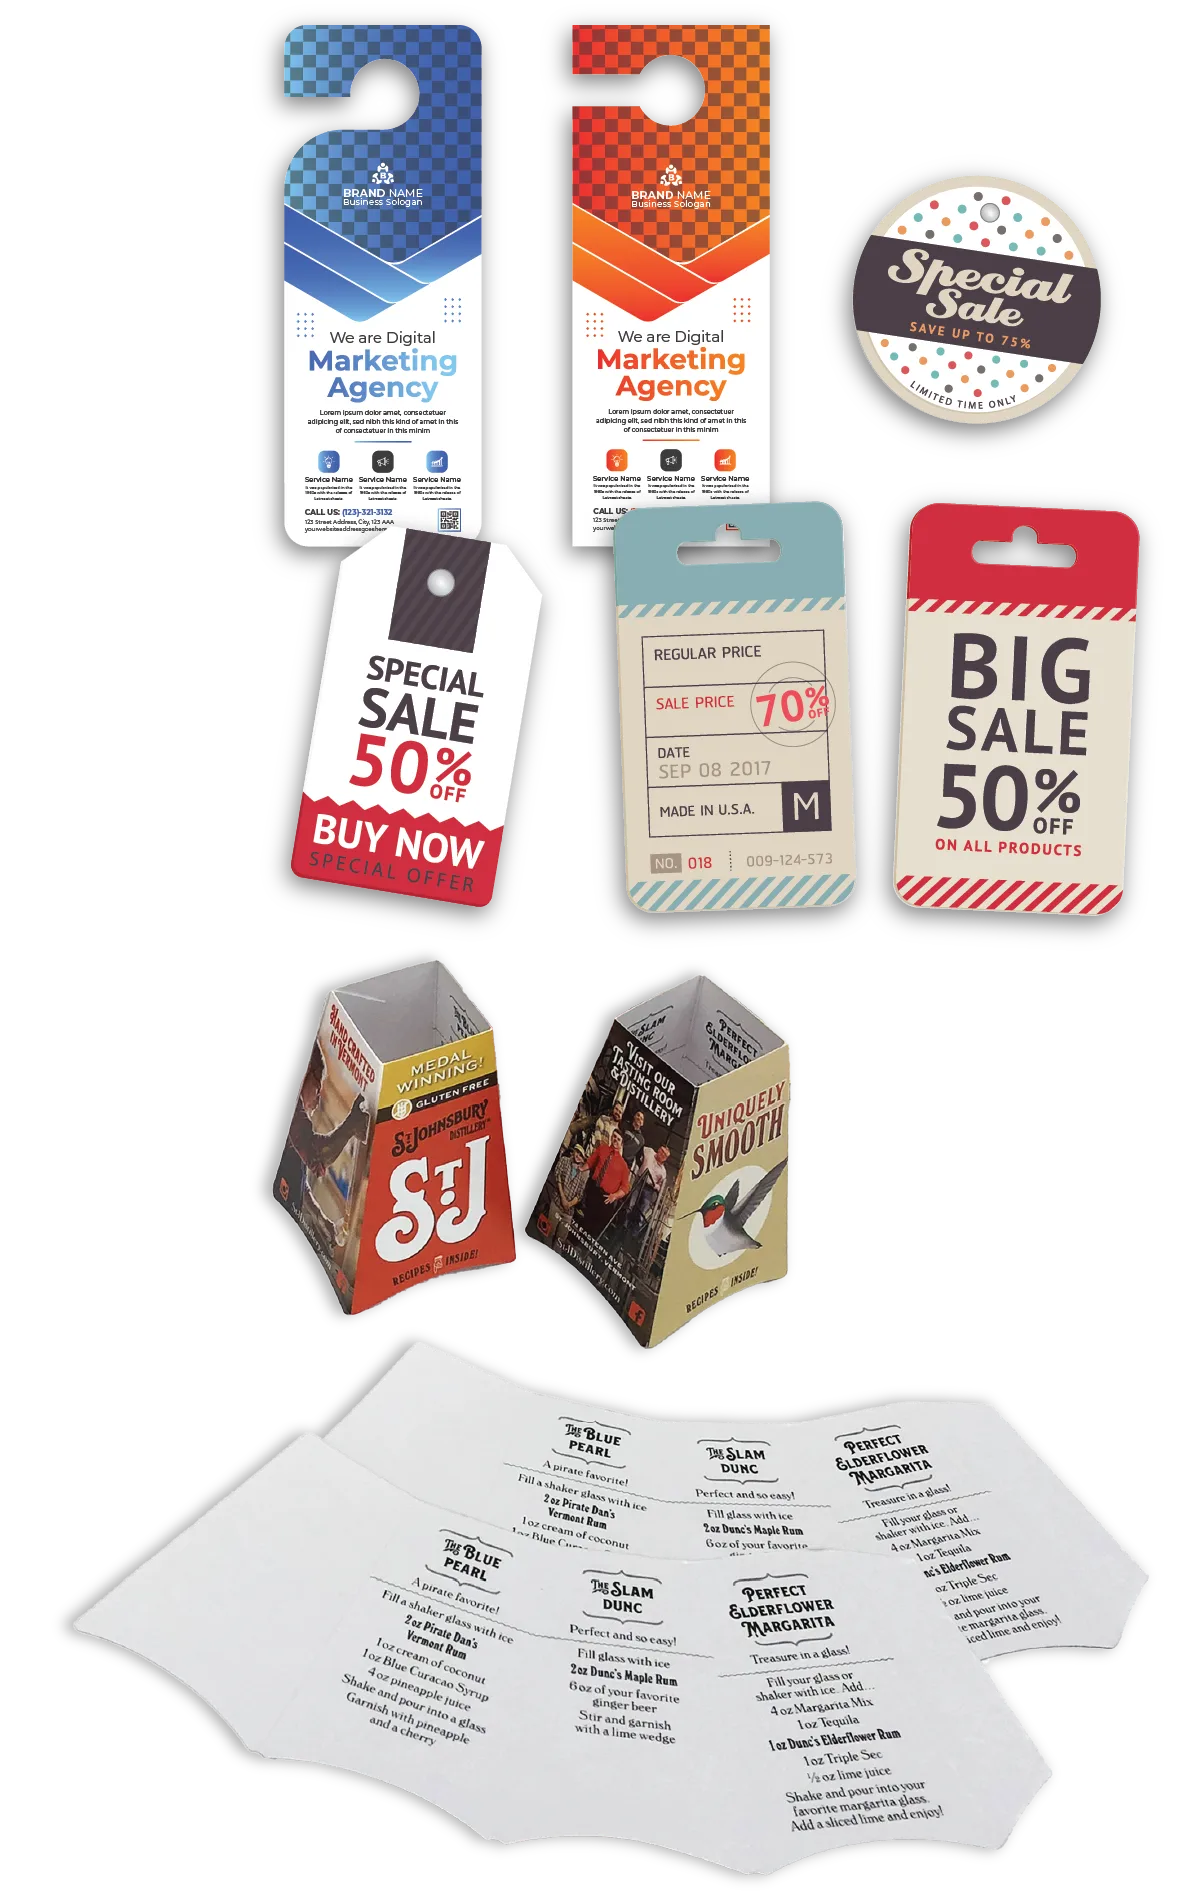 Tags and Doorhangers Printing